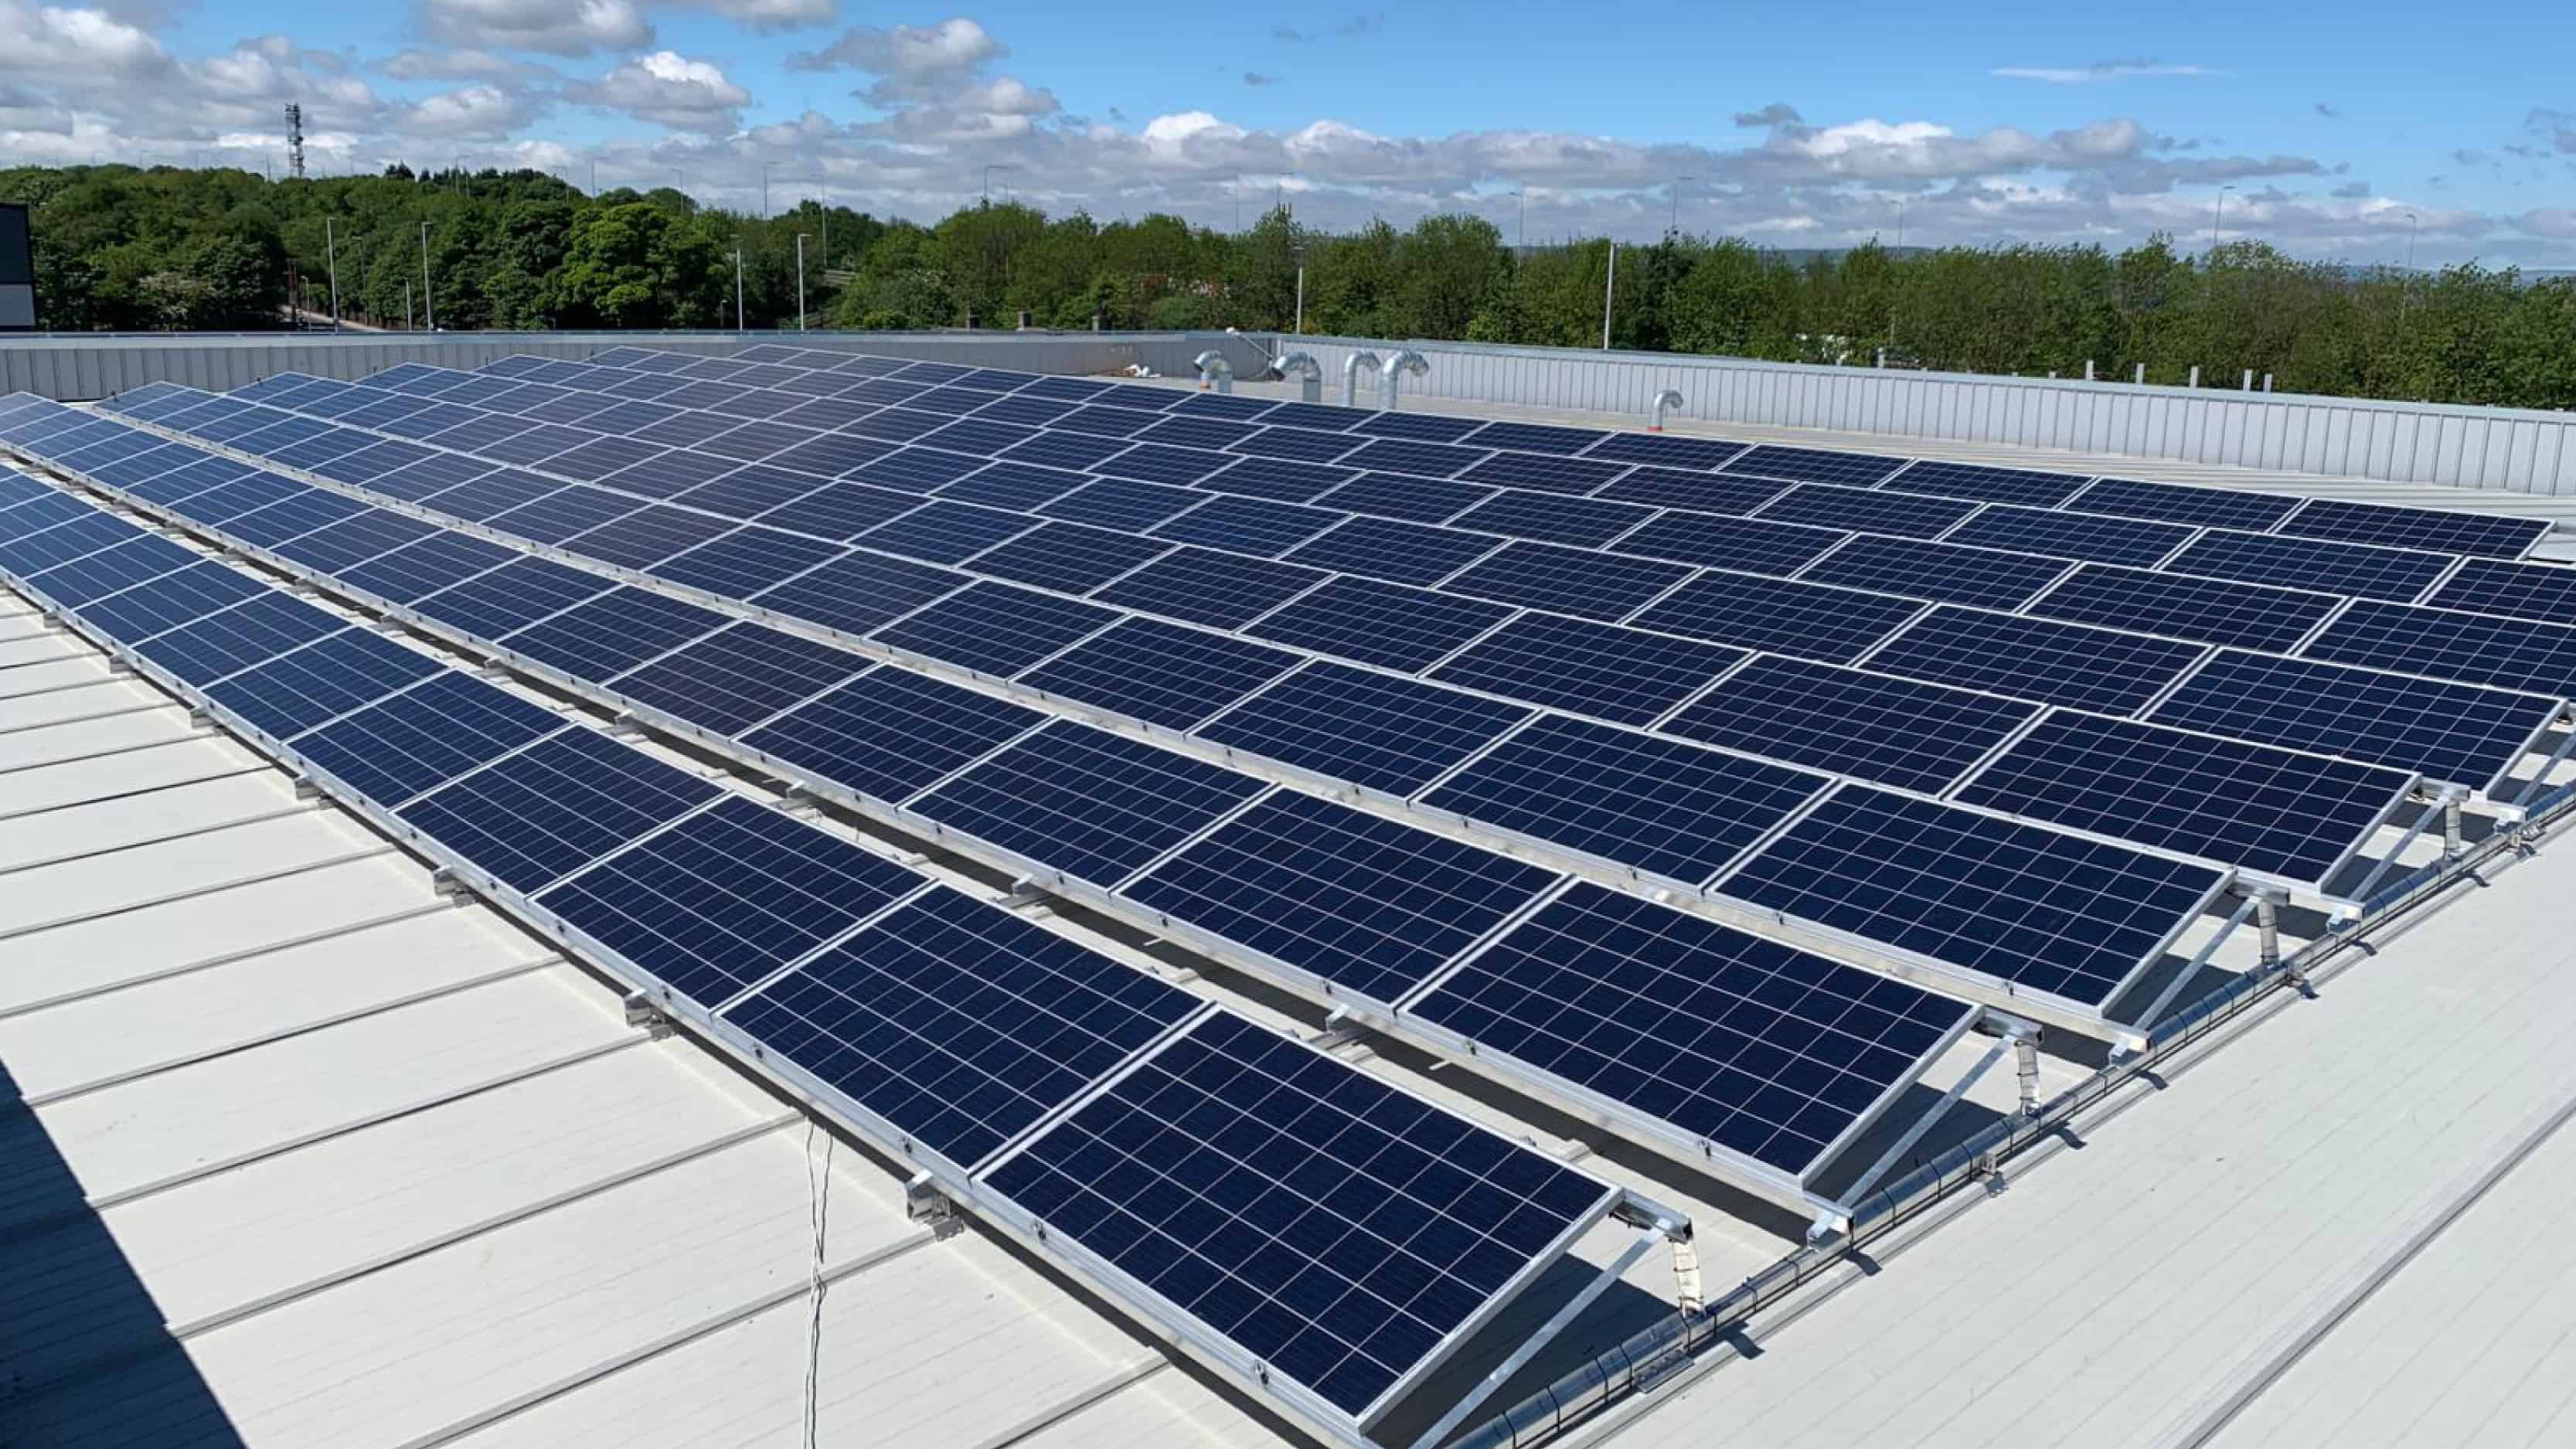 ARH Group complete photovoltaic roof installation - ARH Group